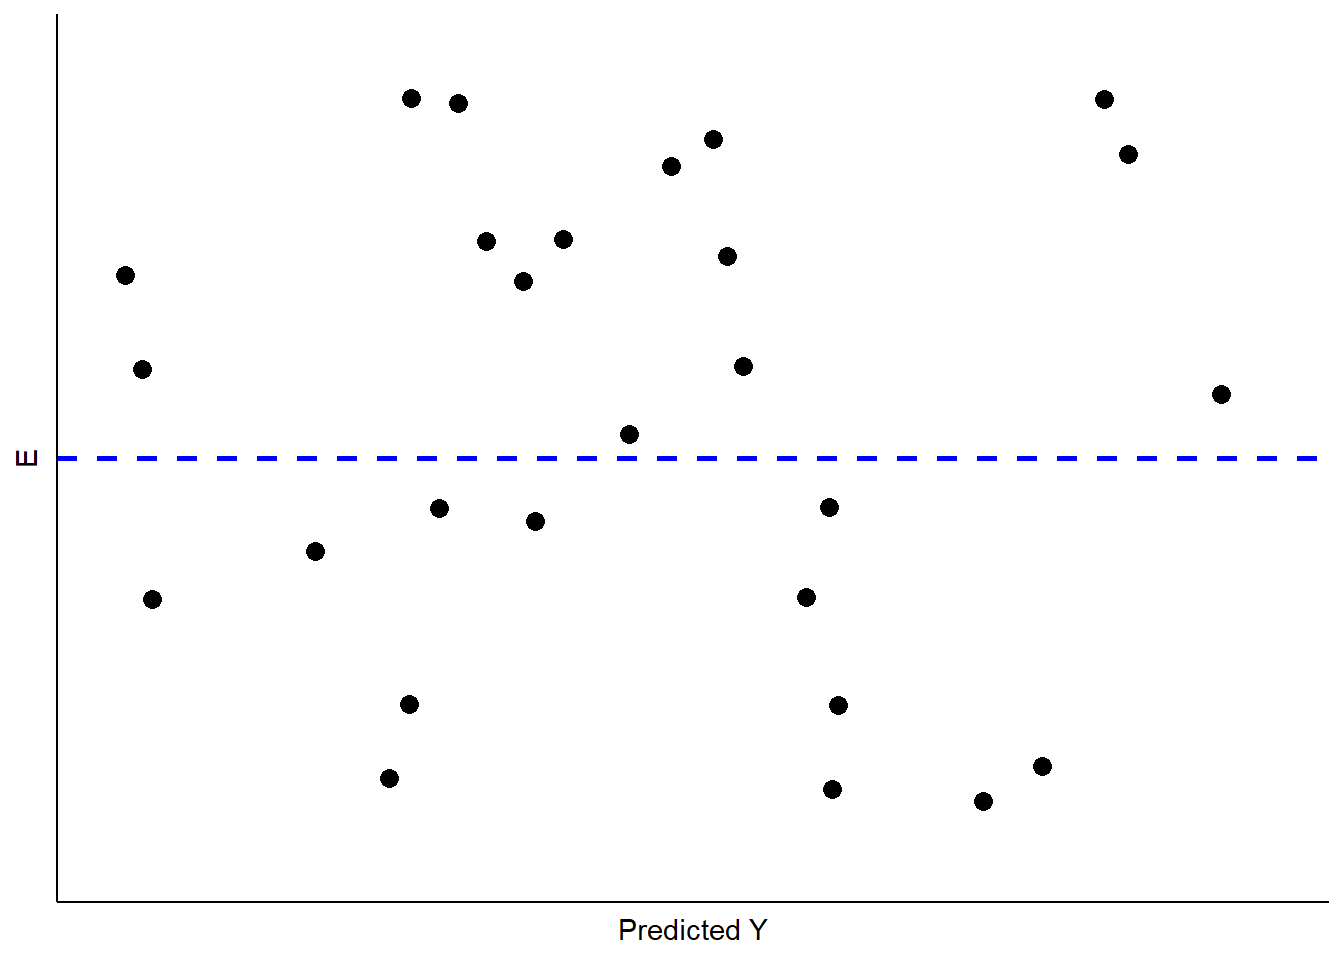 Ideal Pattern of Residuals from a Simple OLS Model